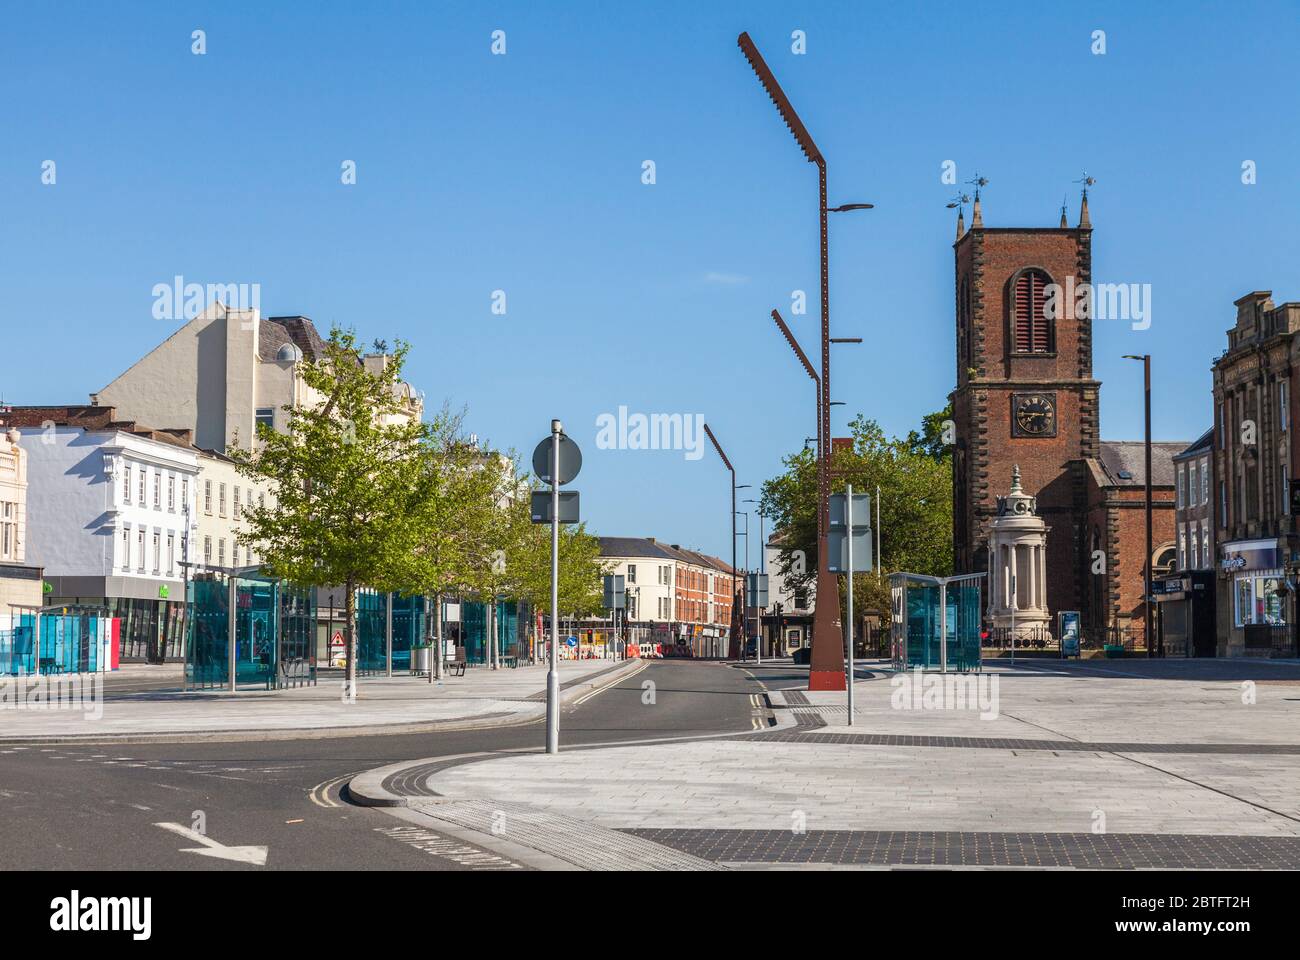 Stockton St High Resolution Stock Photography And Images Alamy